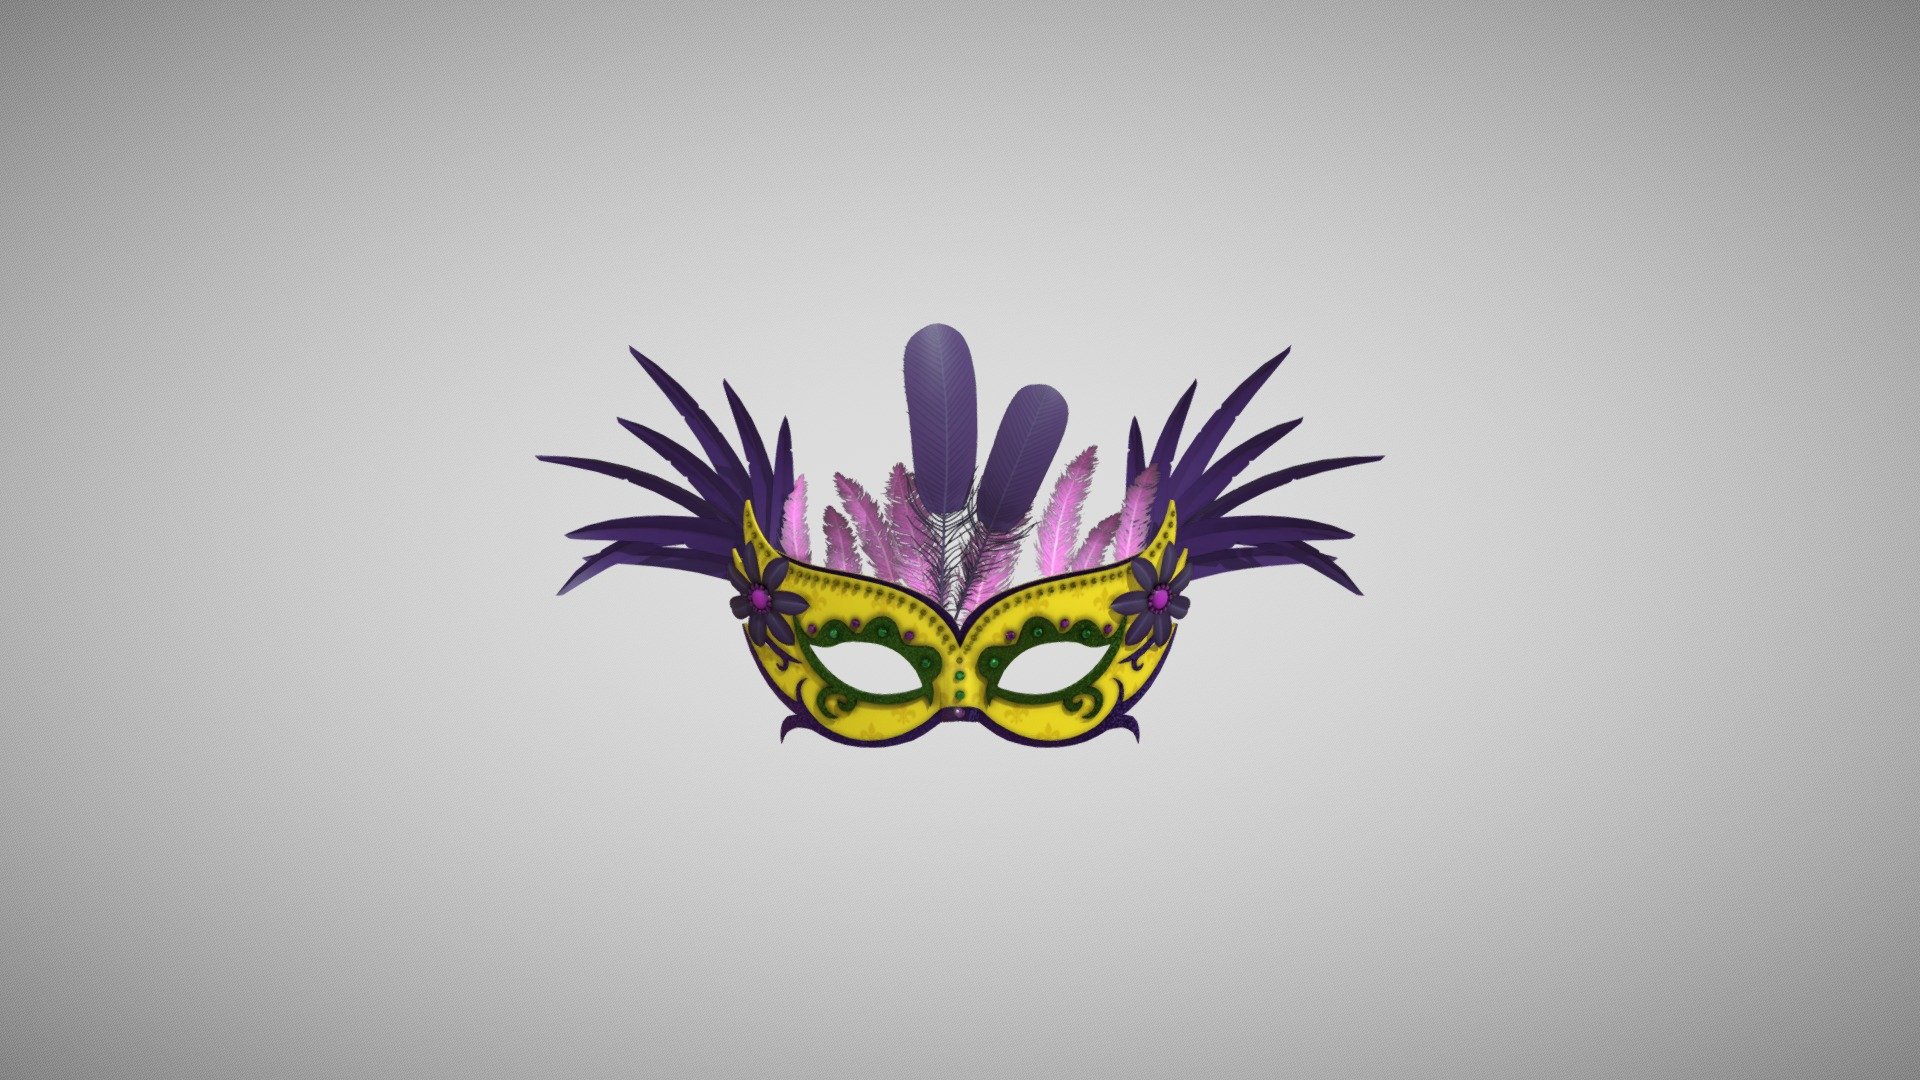 Mardis Gras Mask, Feather Style. Low polygon 3D mask, perfect for mobile use or 3D game engines.
Textures are PBR Metalness 3d model